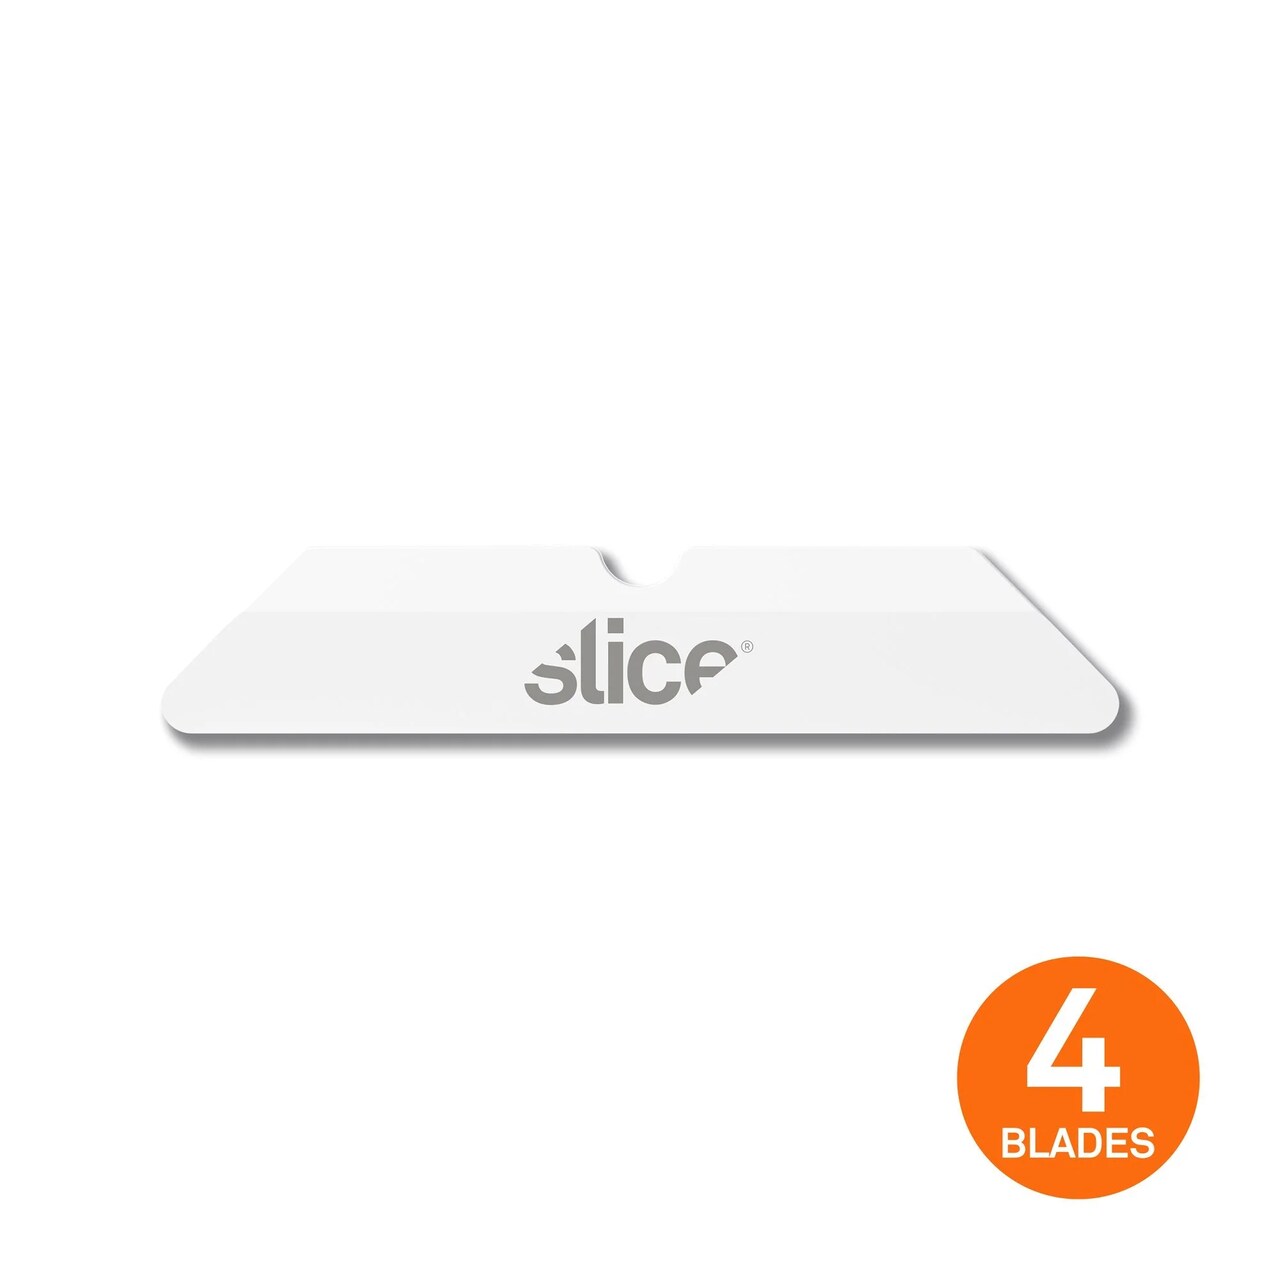 Slice Box Cutter Blades (Rounded Tip) - Pack of 4